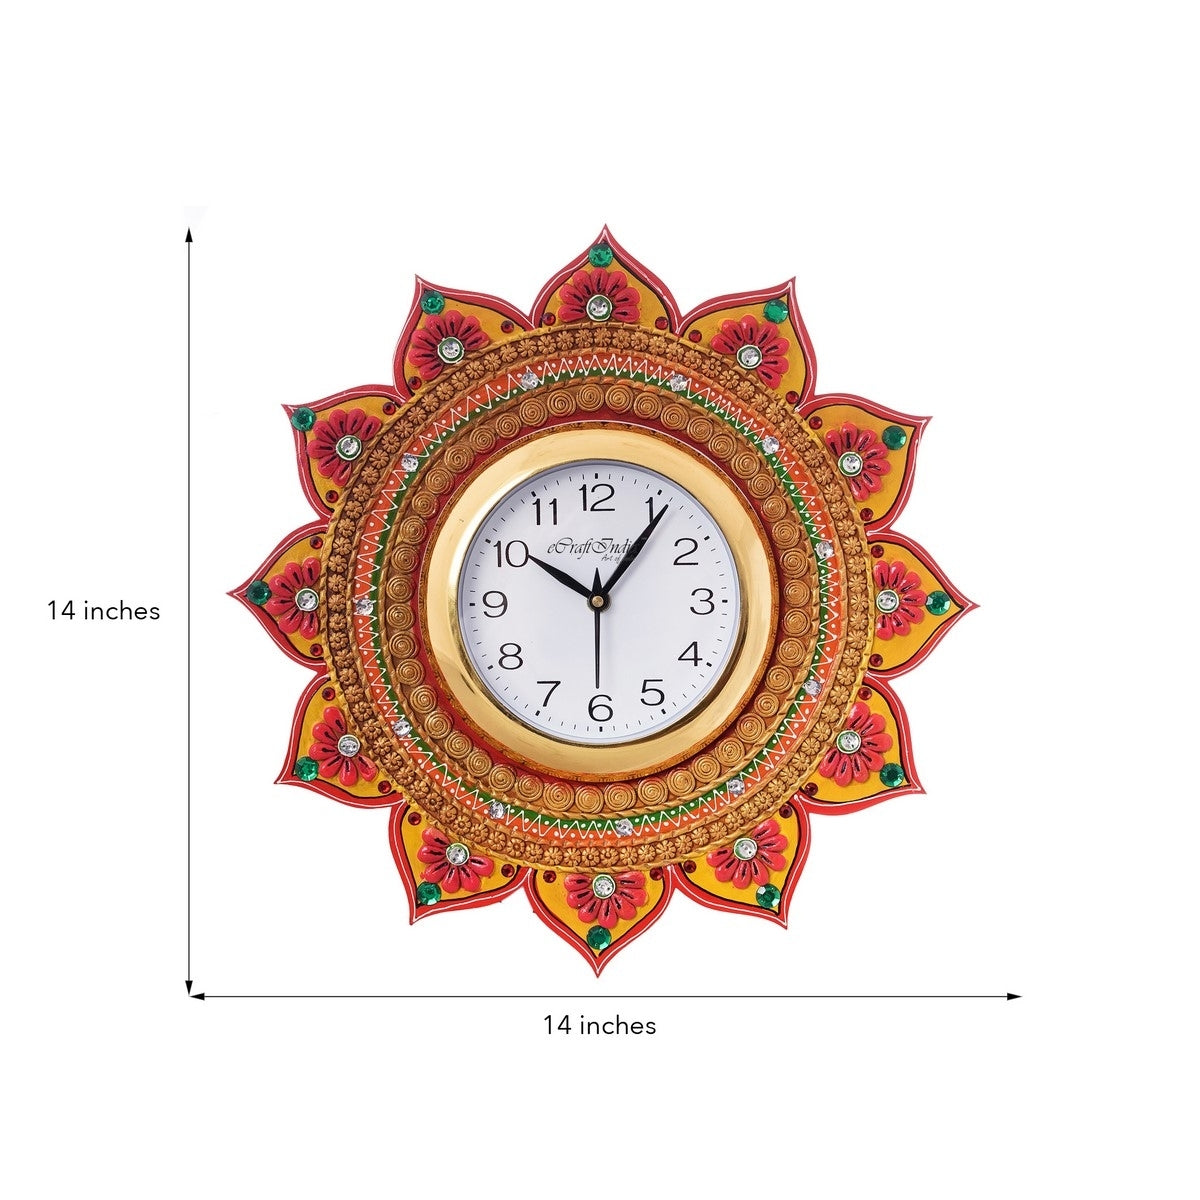 Royal and Elegant Handcrafted Flower Design Papier Mache Wooden Decorative Wall Clock 2